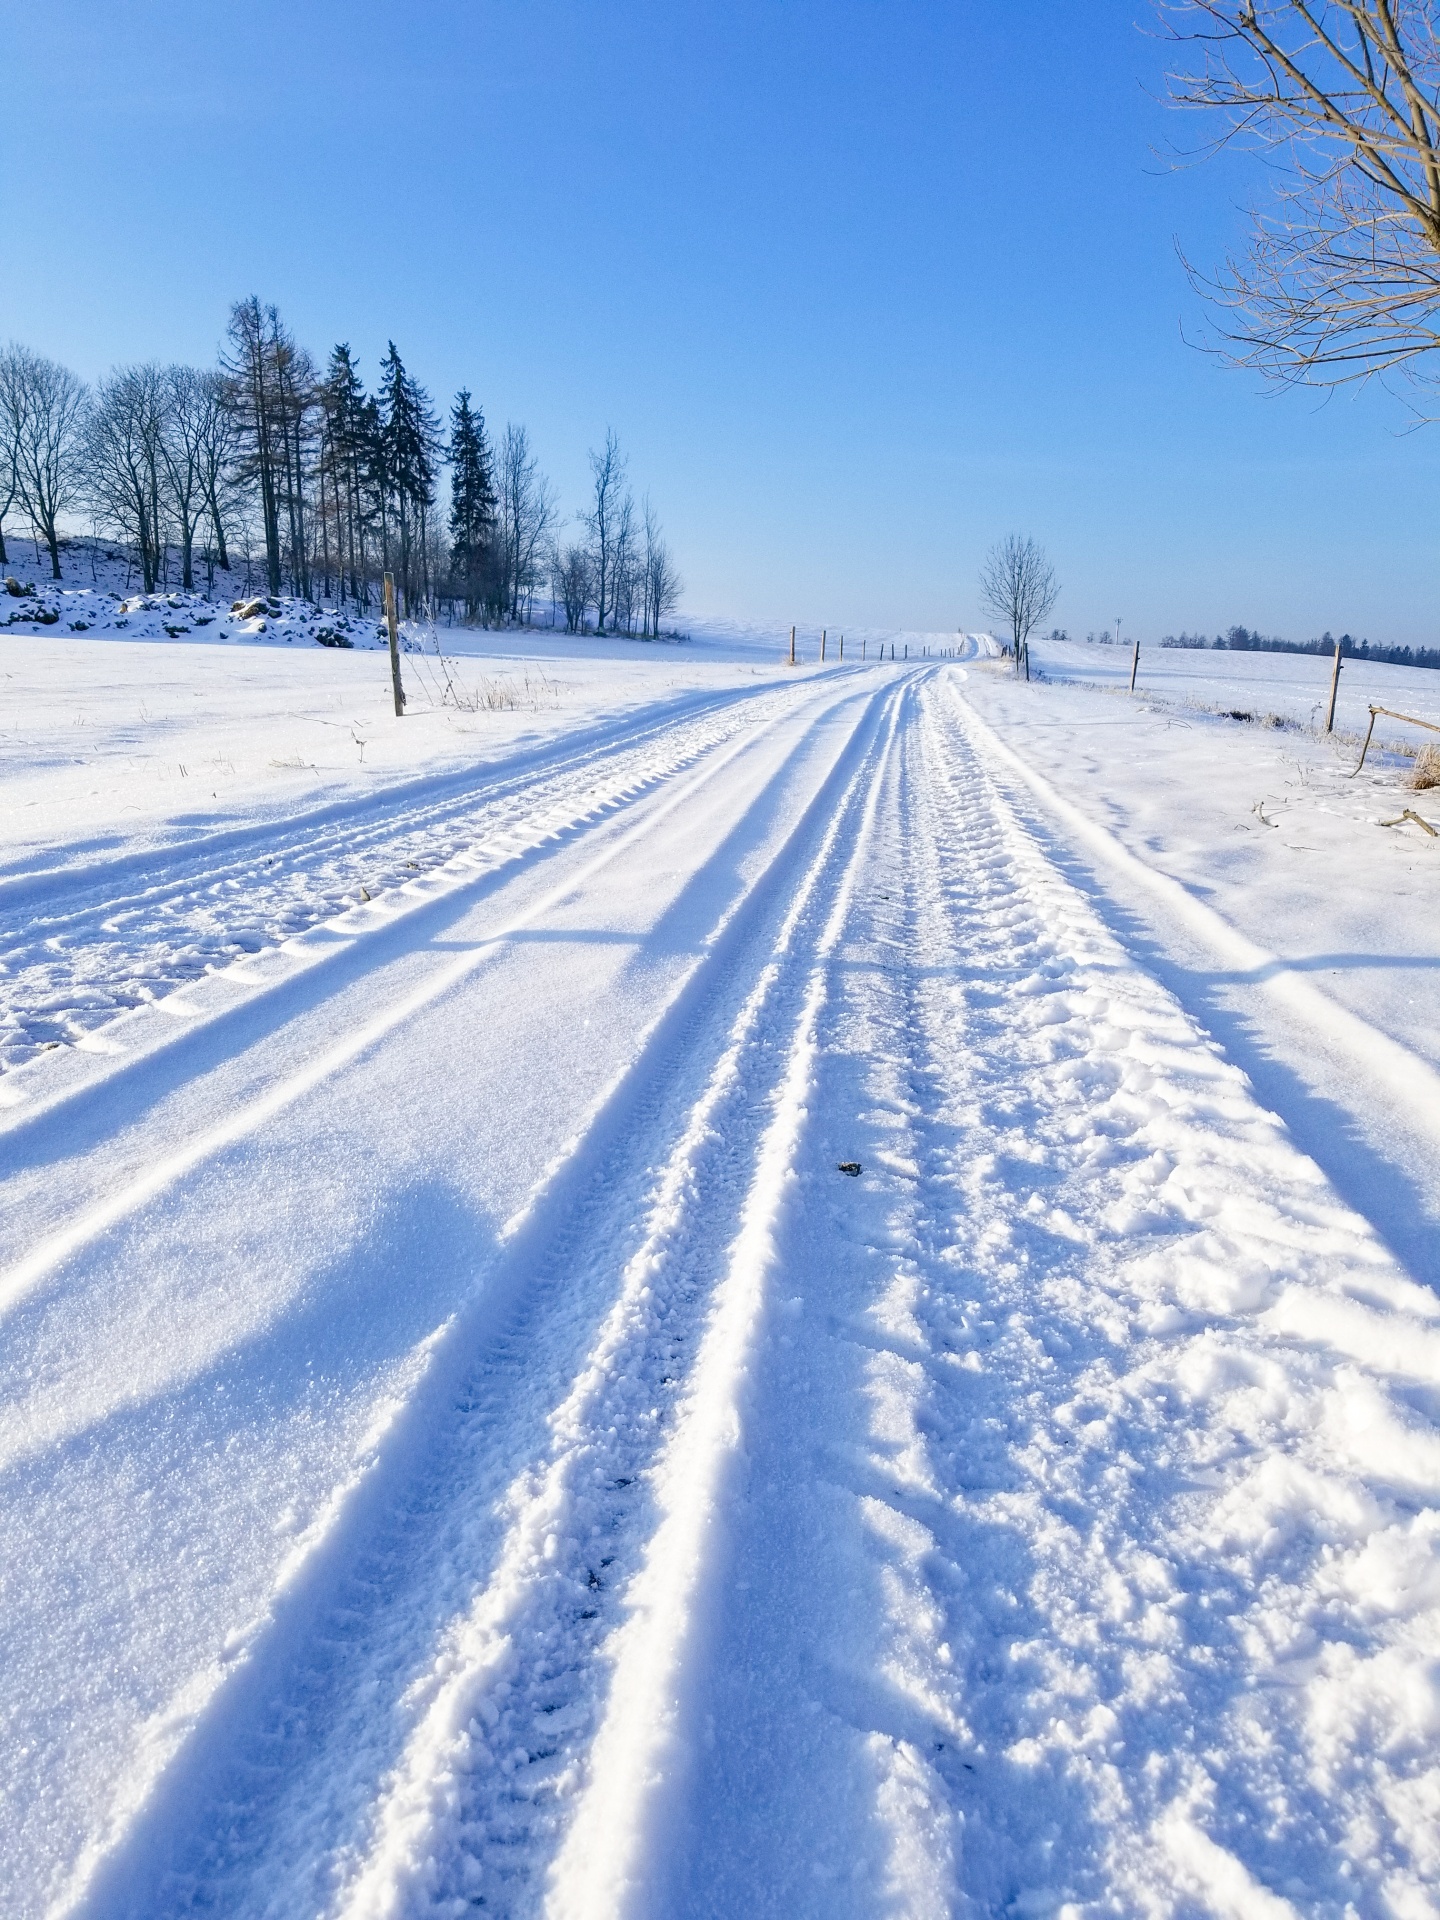 Various vehicle tracks in the snow covered road